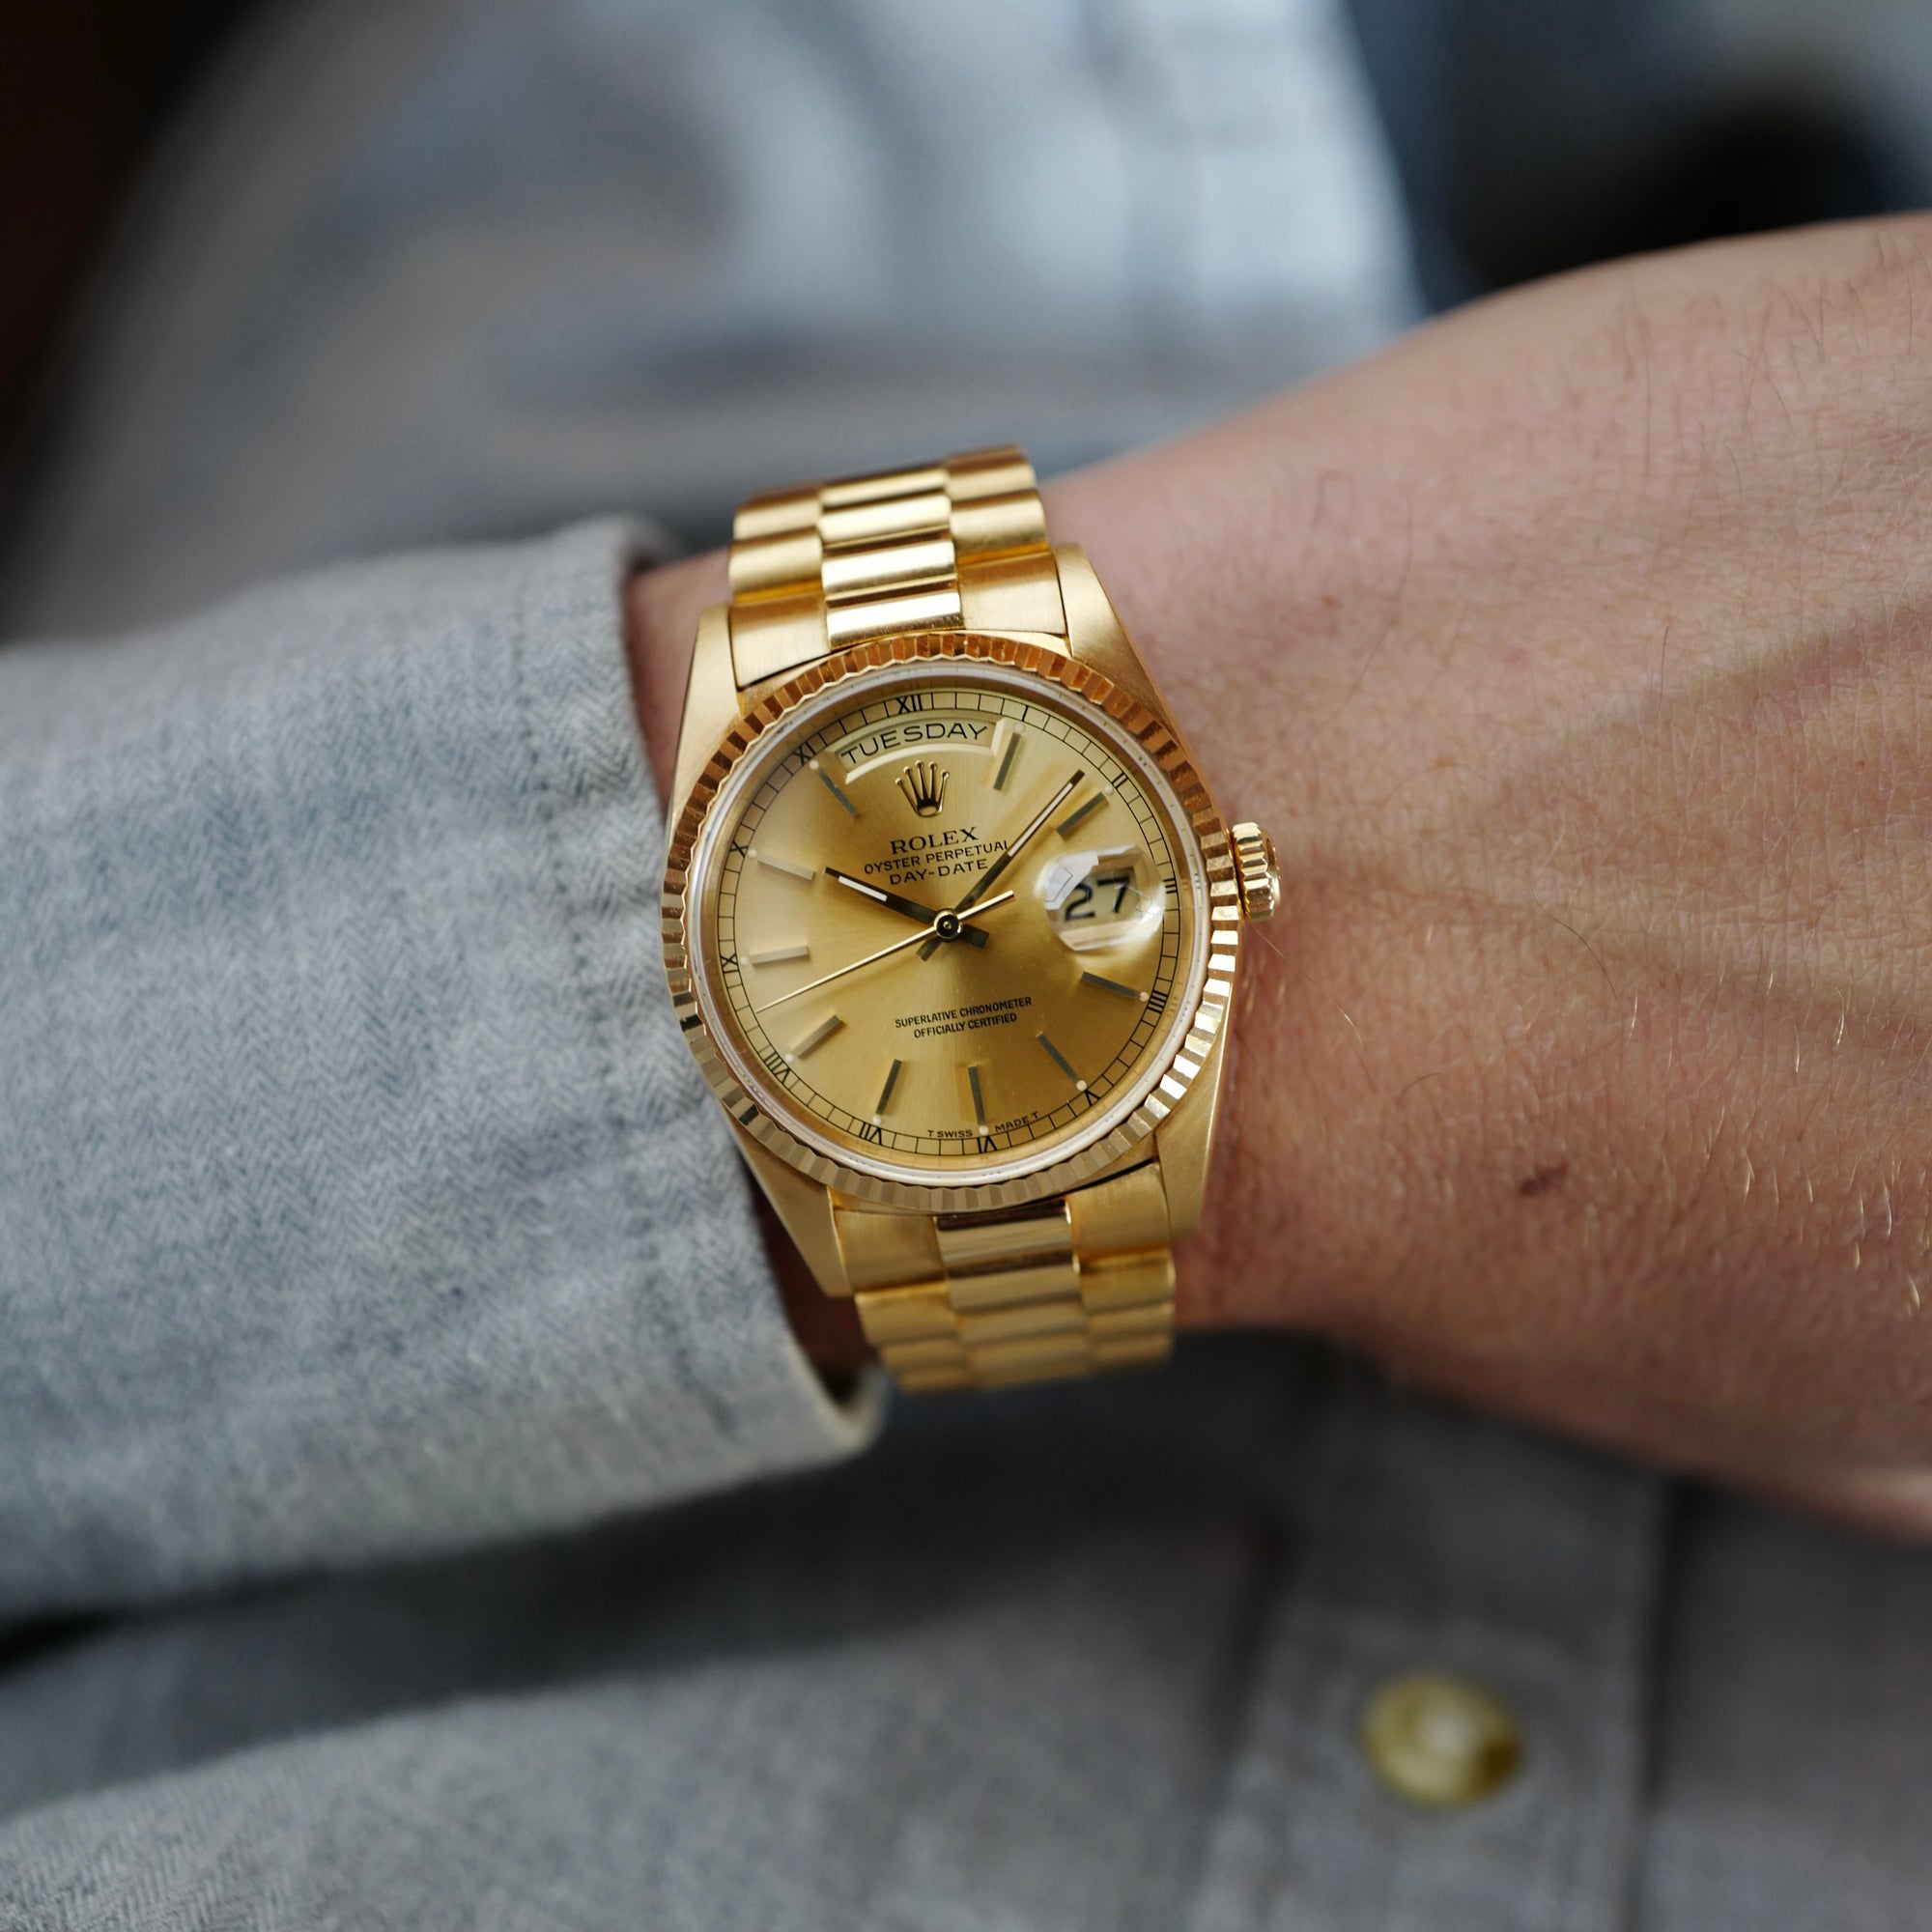 Rolex - Rolex Yellow Gold Day-Date Watch Ref. 18238 (NEW ARRIVAL) - The Keystone Watches